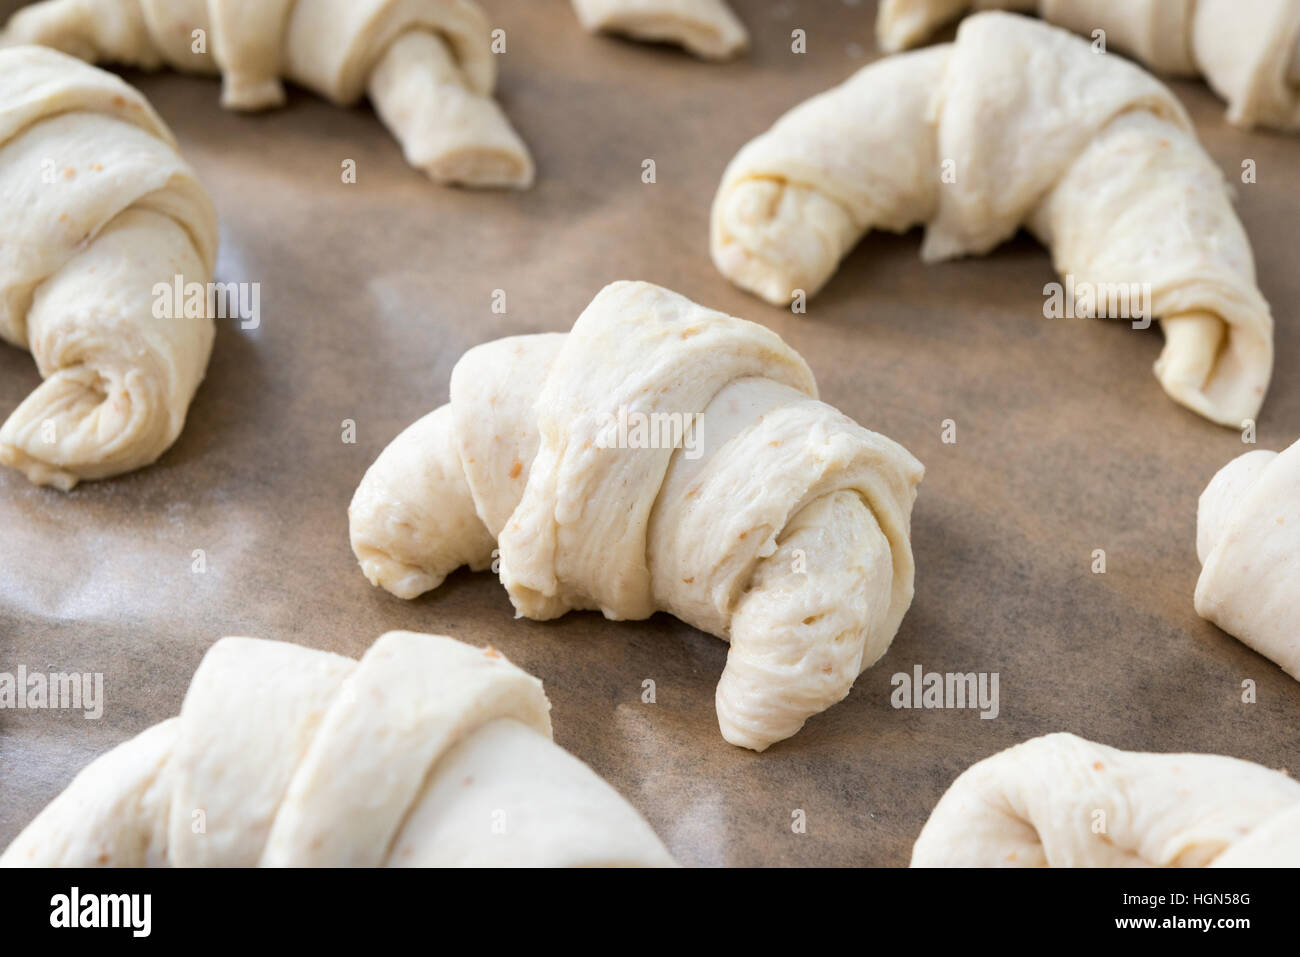 Homemade croissant dough shaped and rising before being cooked Stock Photo